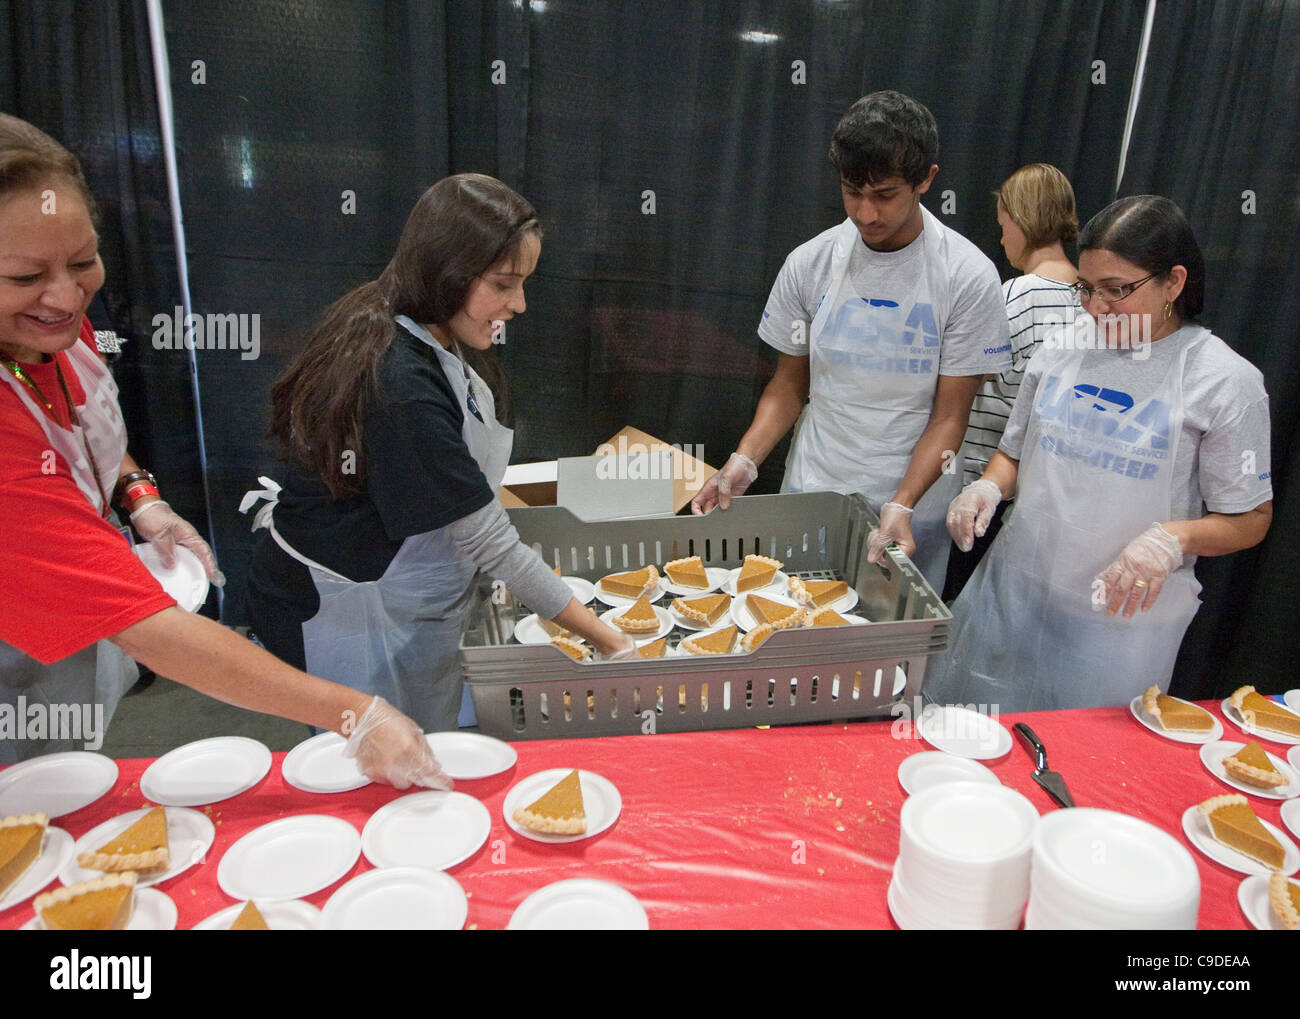 Volunteers hand serve and handout food to attendees of free Thanksgiving meal donated by Texas supermarket Stock Photo